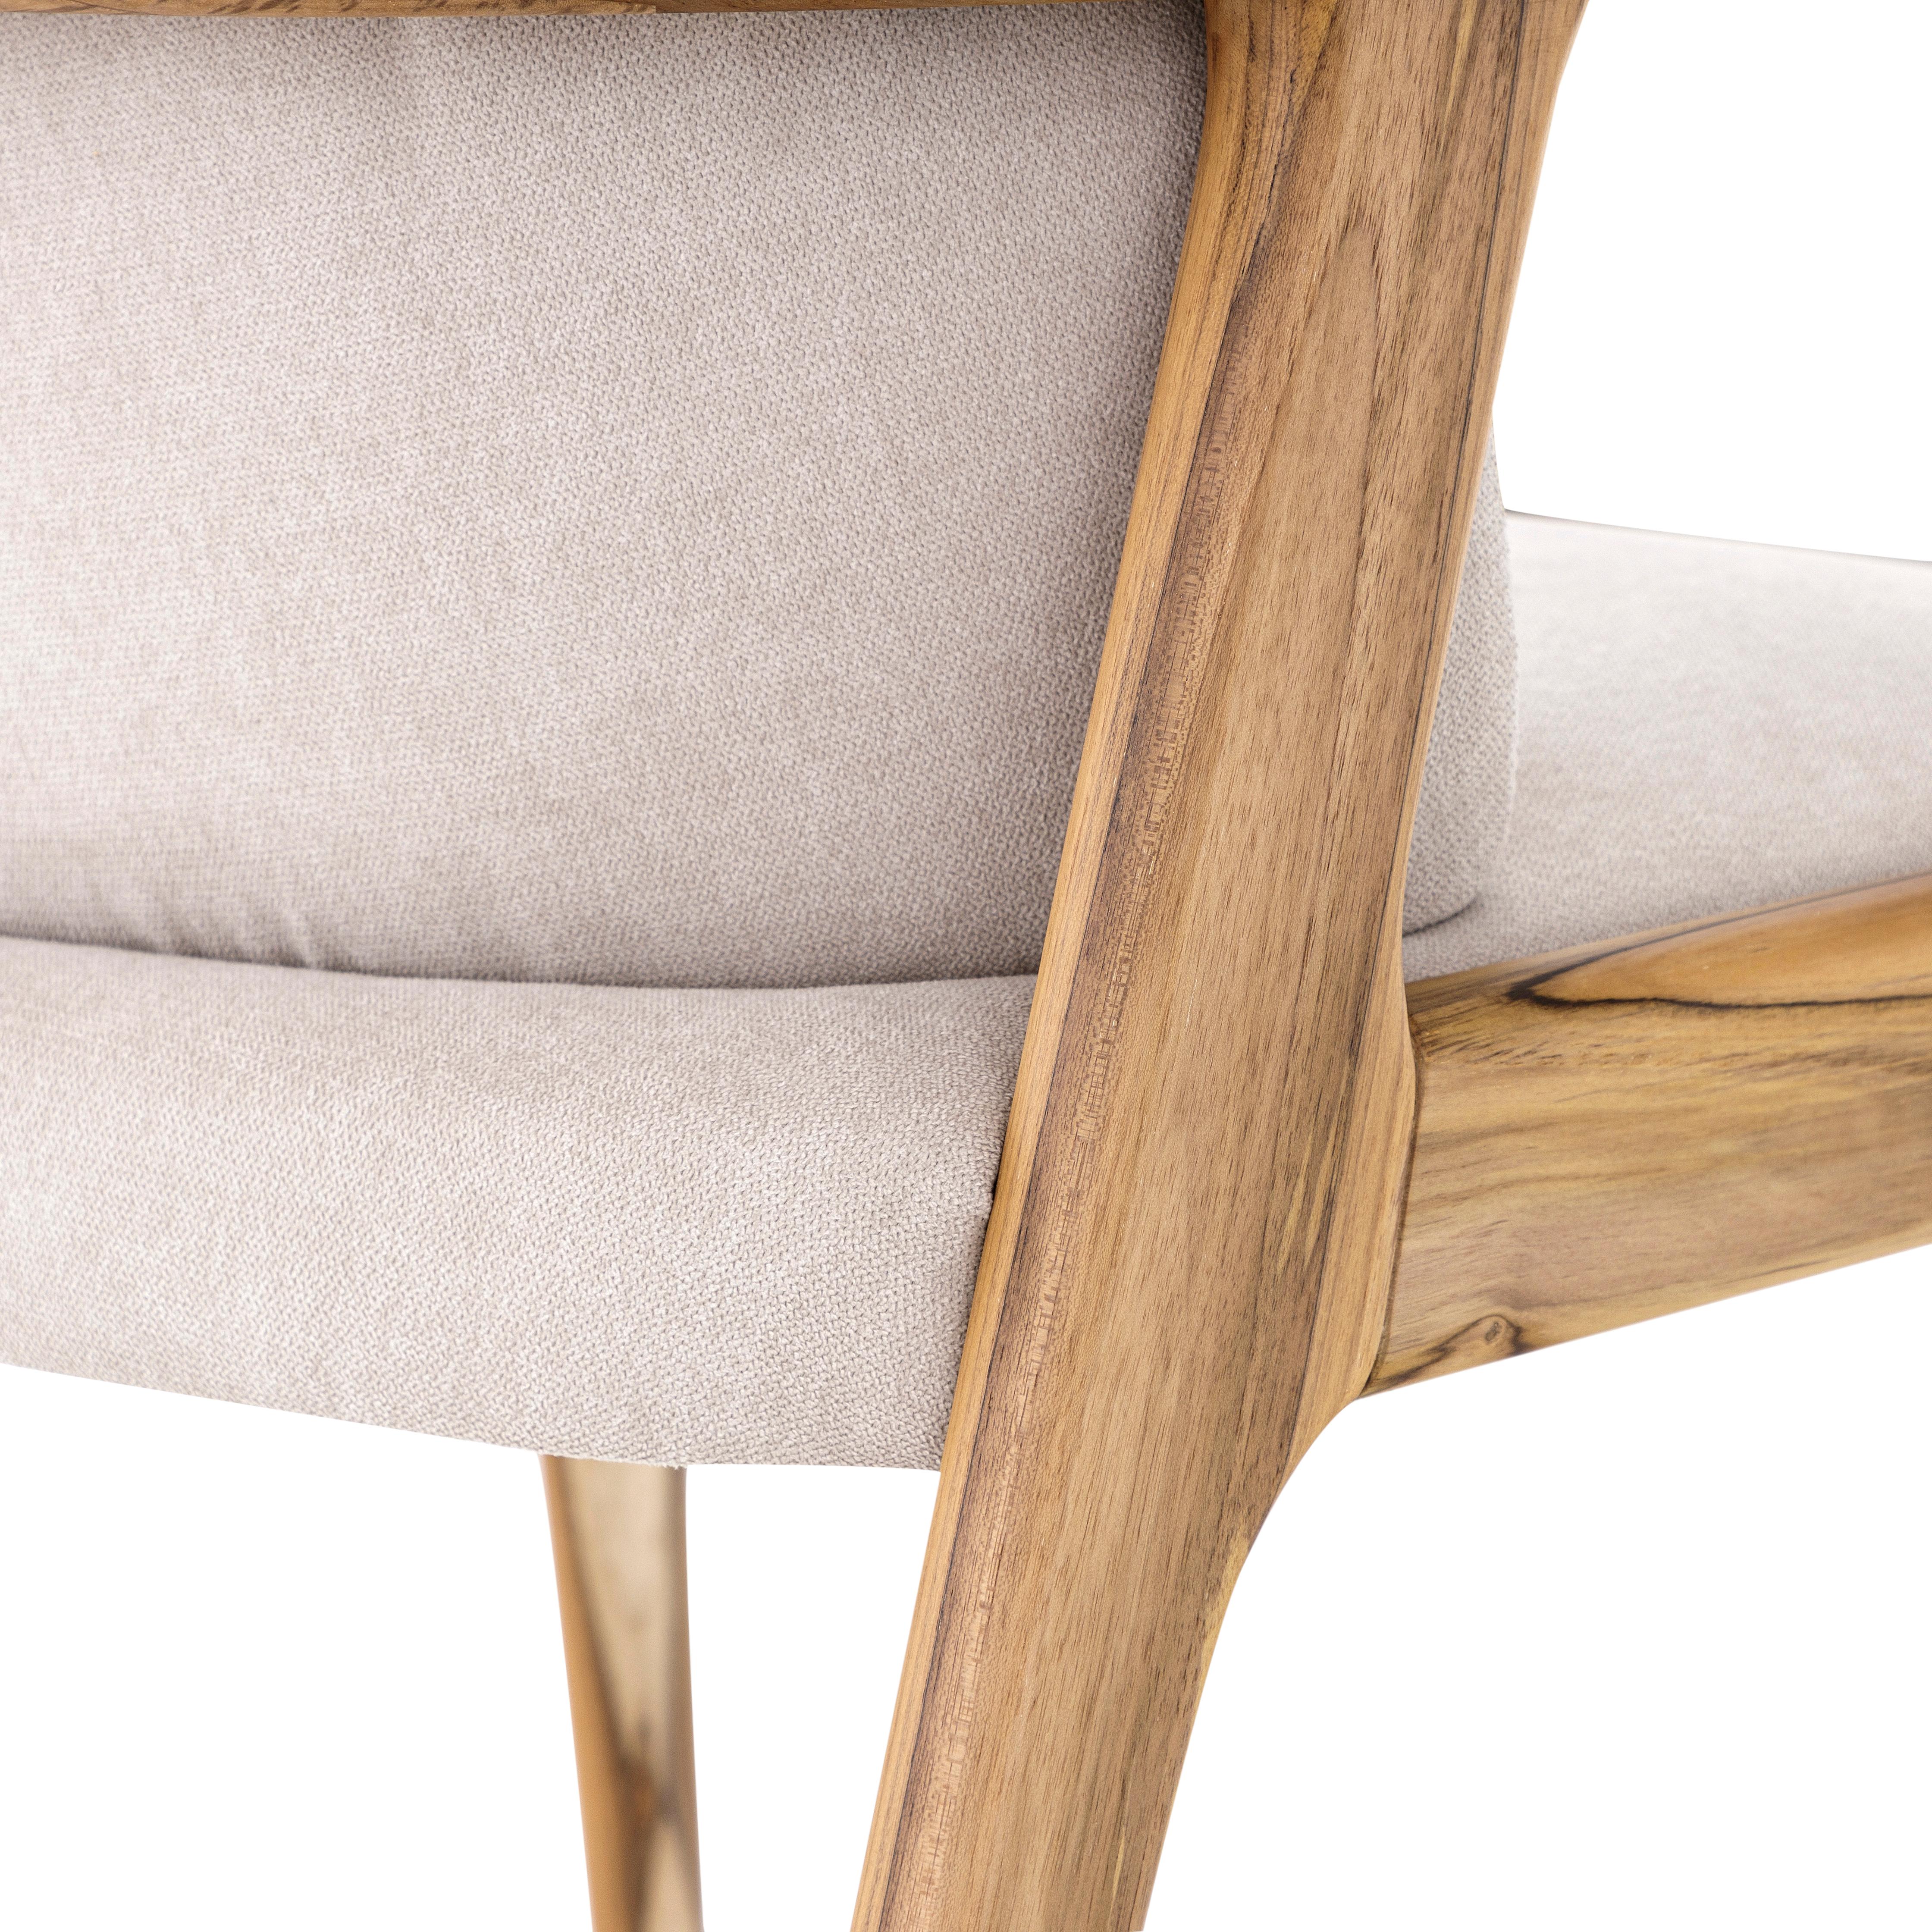 Contemporary Nowe Dining Chair in Teak Wood Finish and Beige Cotton Fabric For Sale